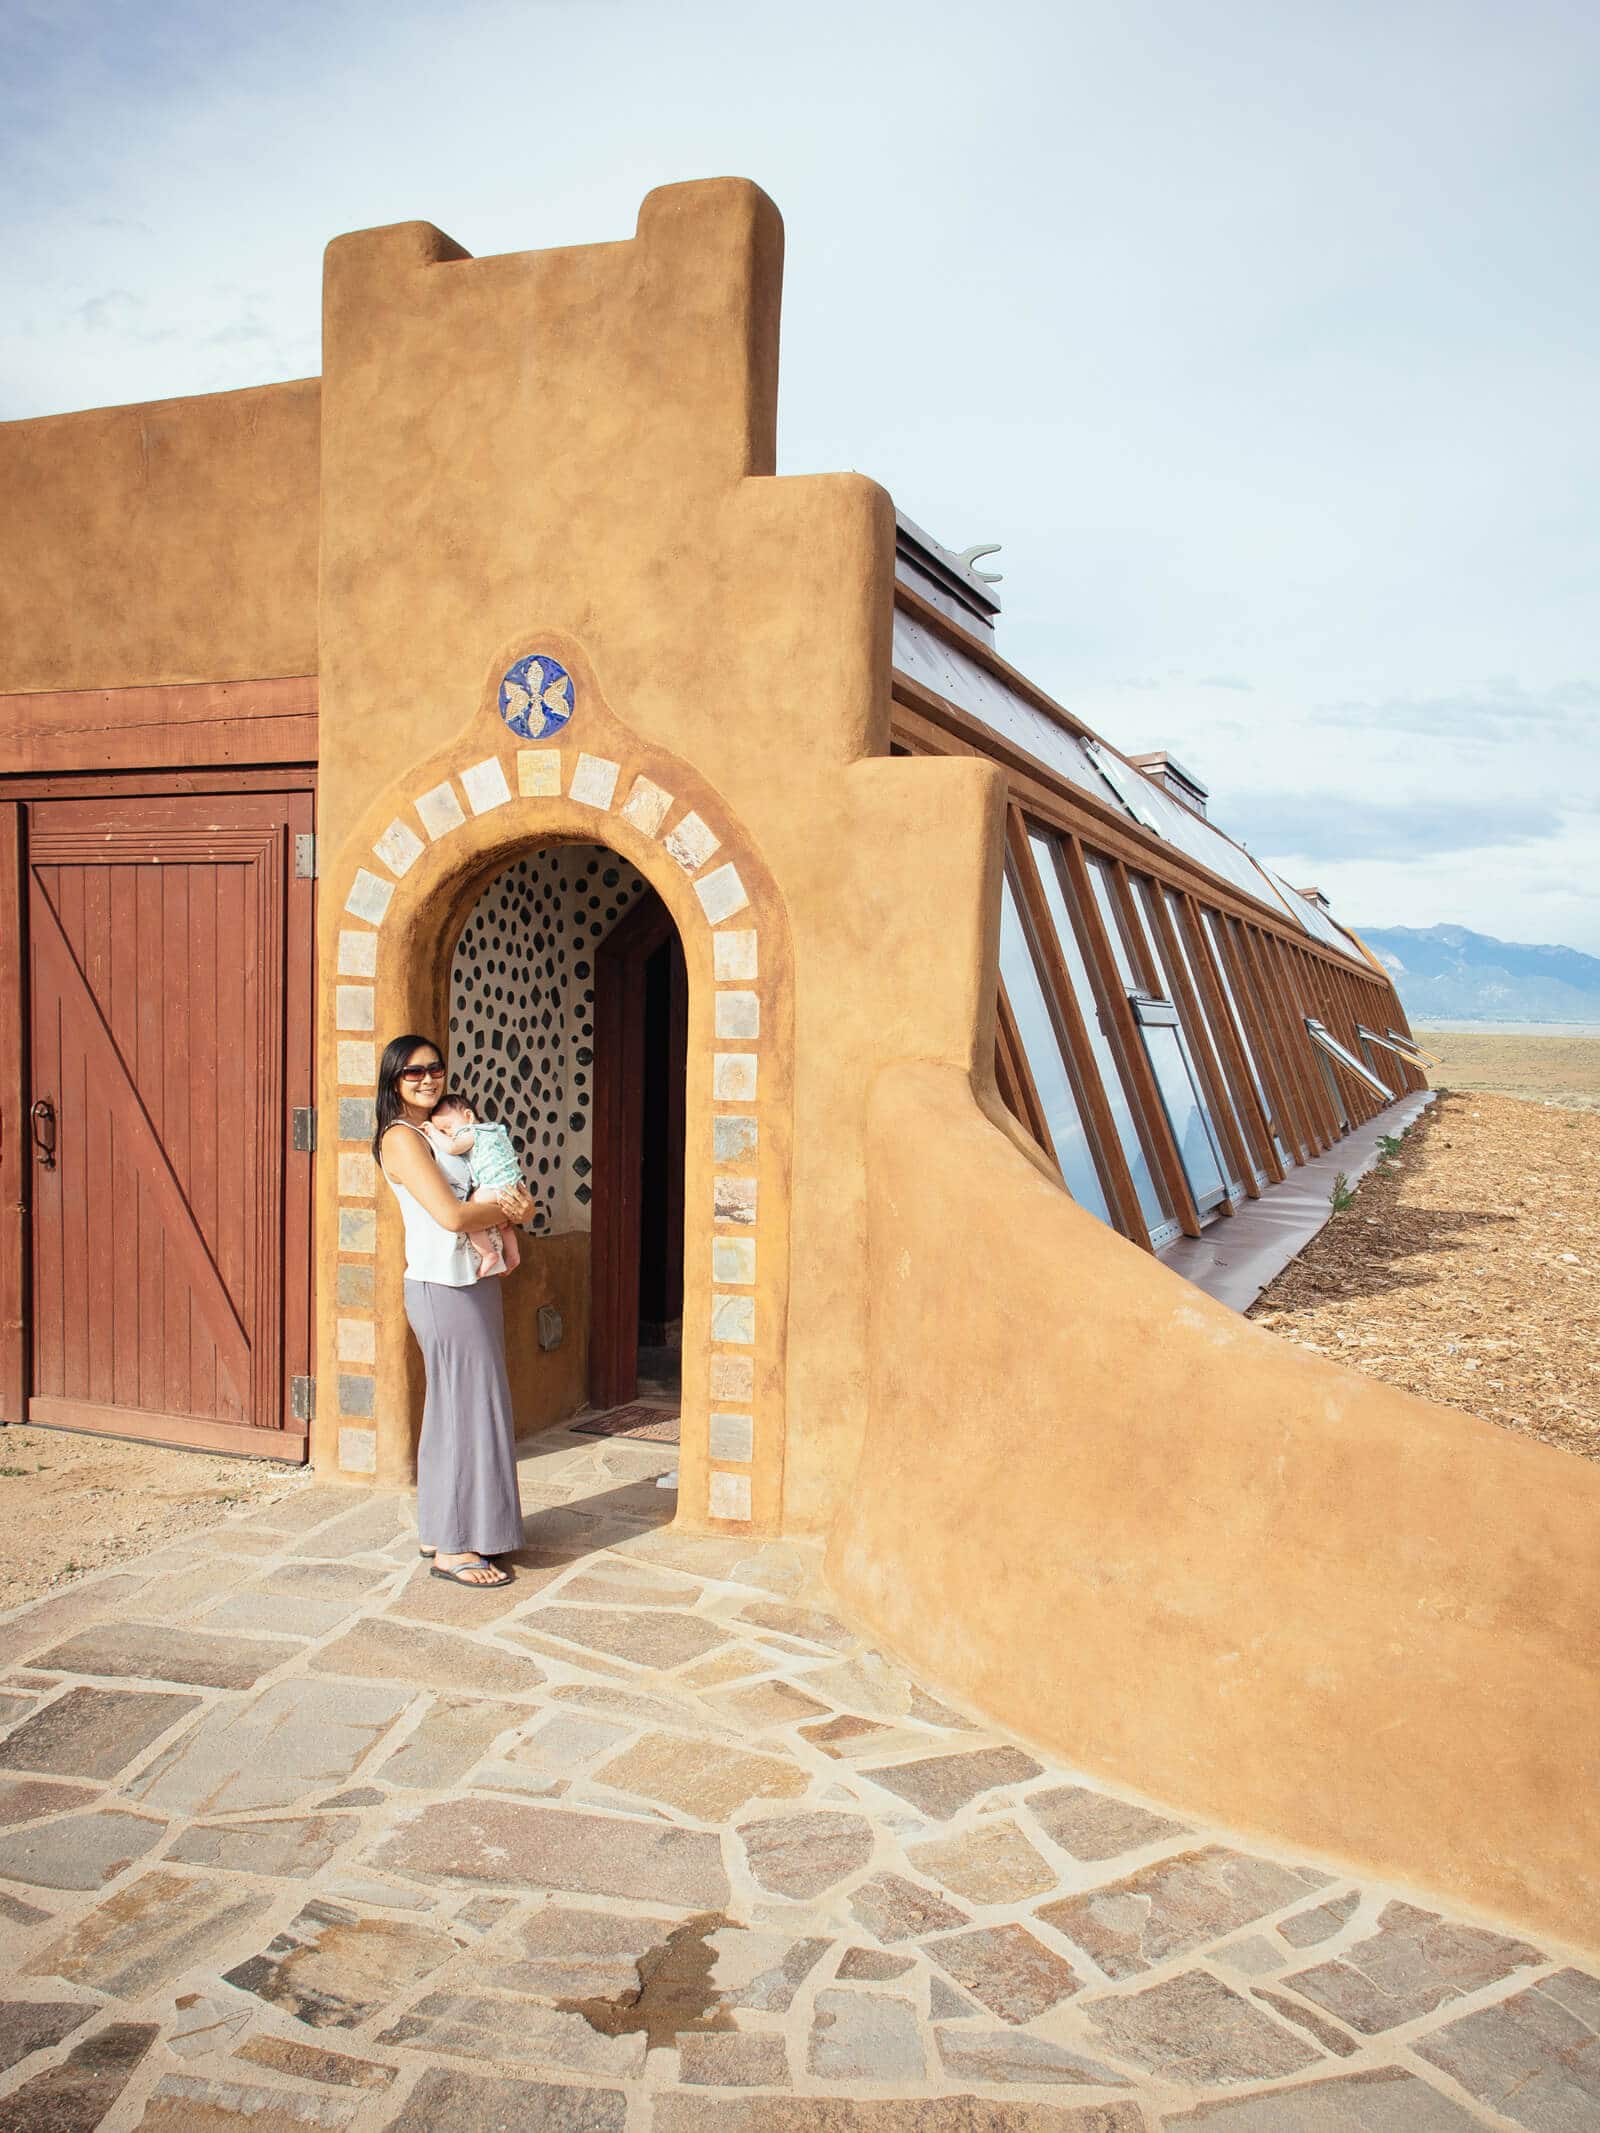 Entrance to the eco-friendly Waybee Earthship